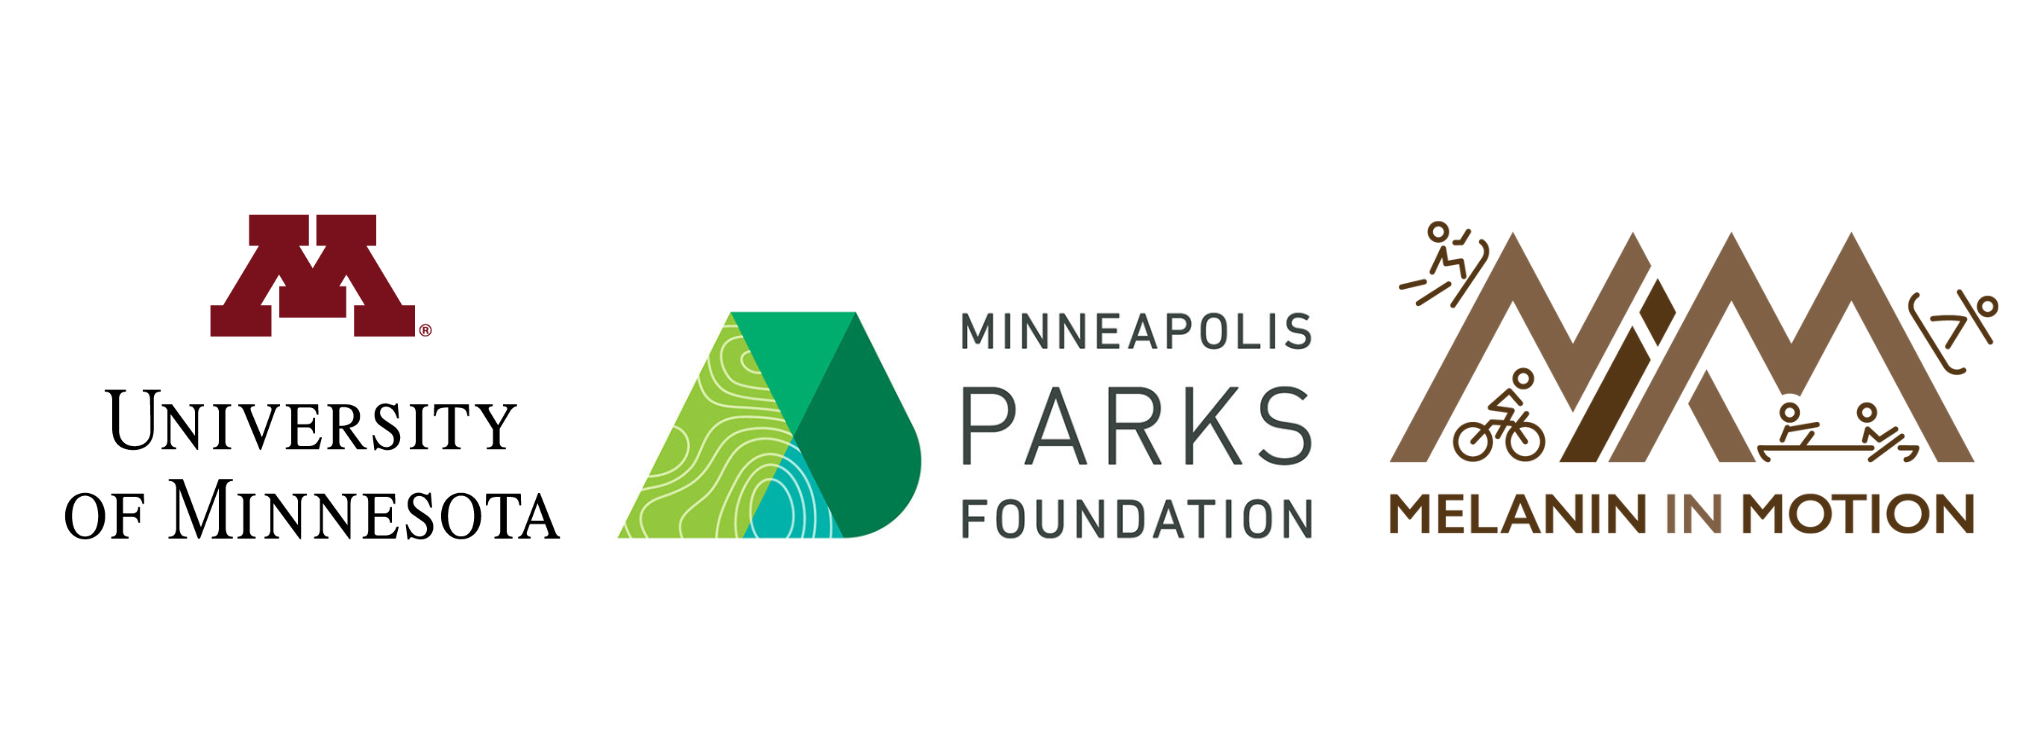 Three logos are placed horizontally. From left to right, they are: University of Minnesota, Minneapolis Parks Foundation, and Melanin in Motion.